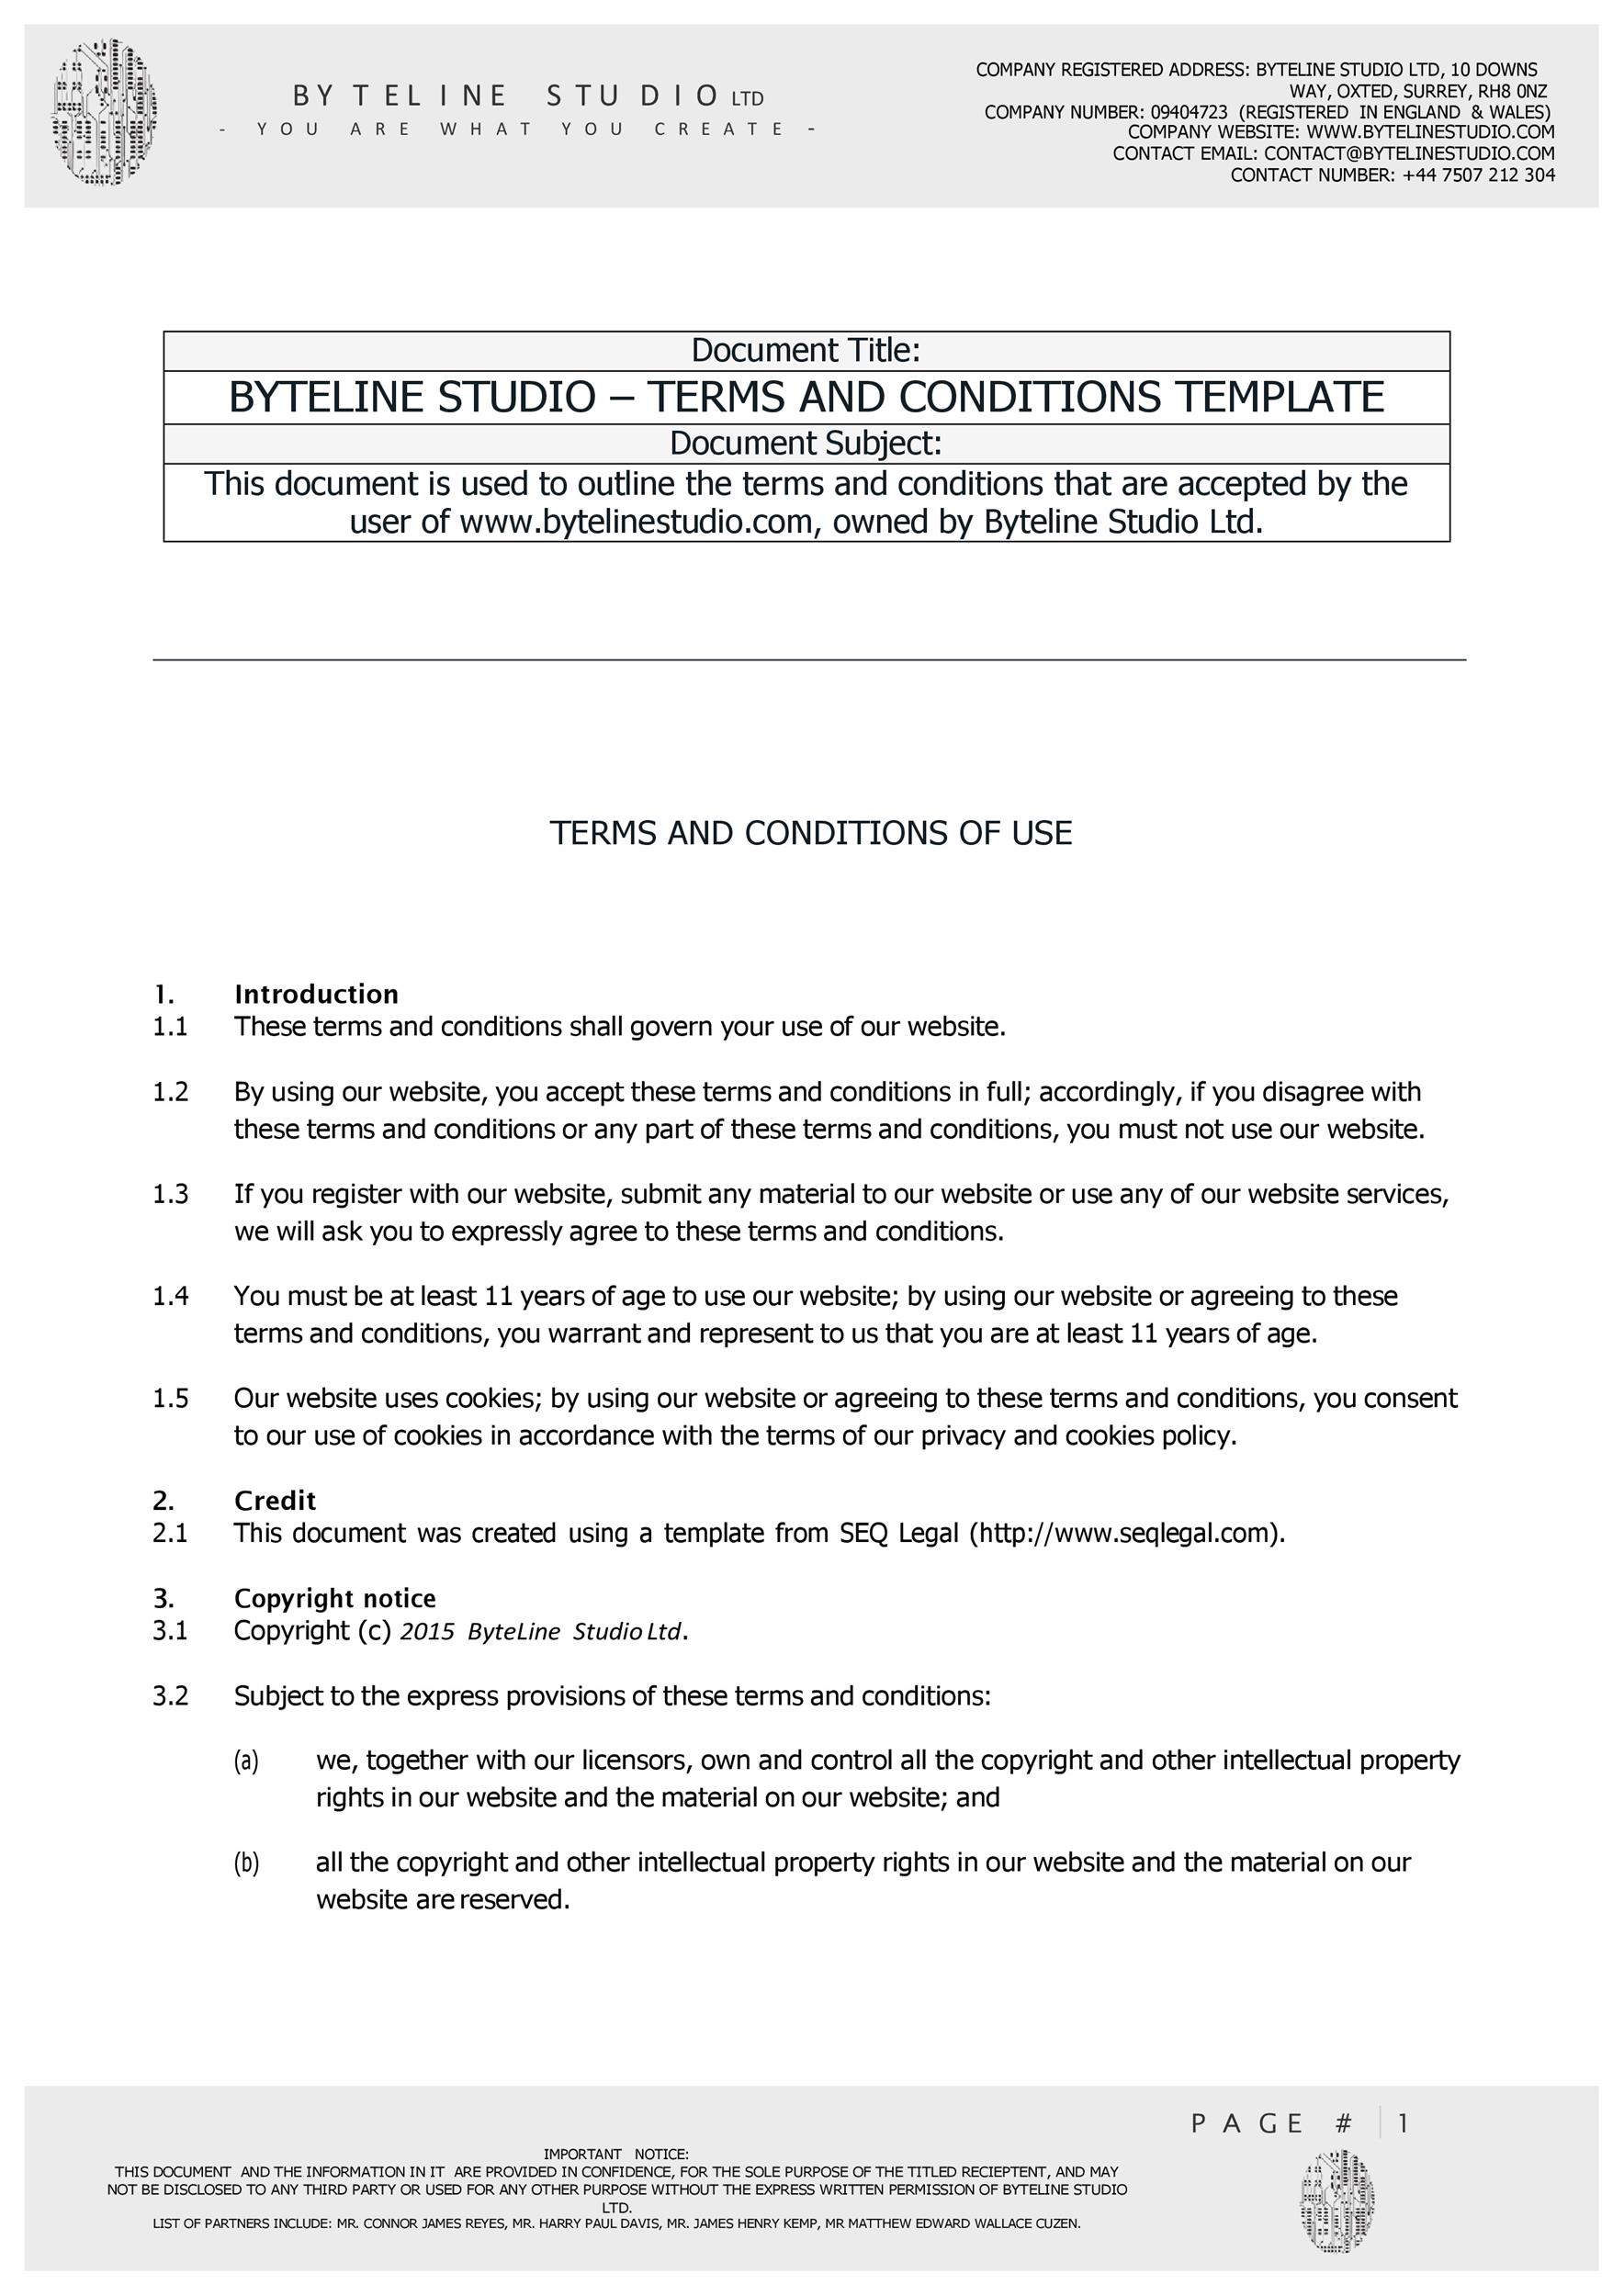 40-free-terms-and-conditions-templates-for-any-website-template-lab